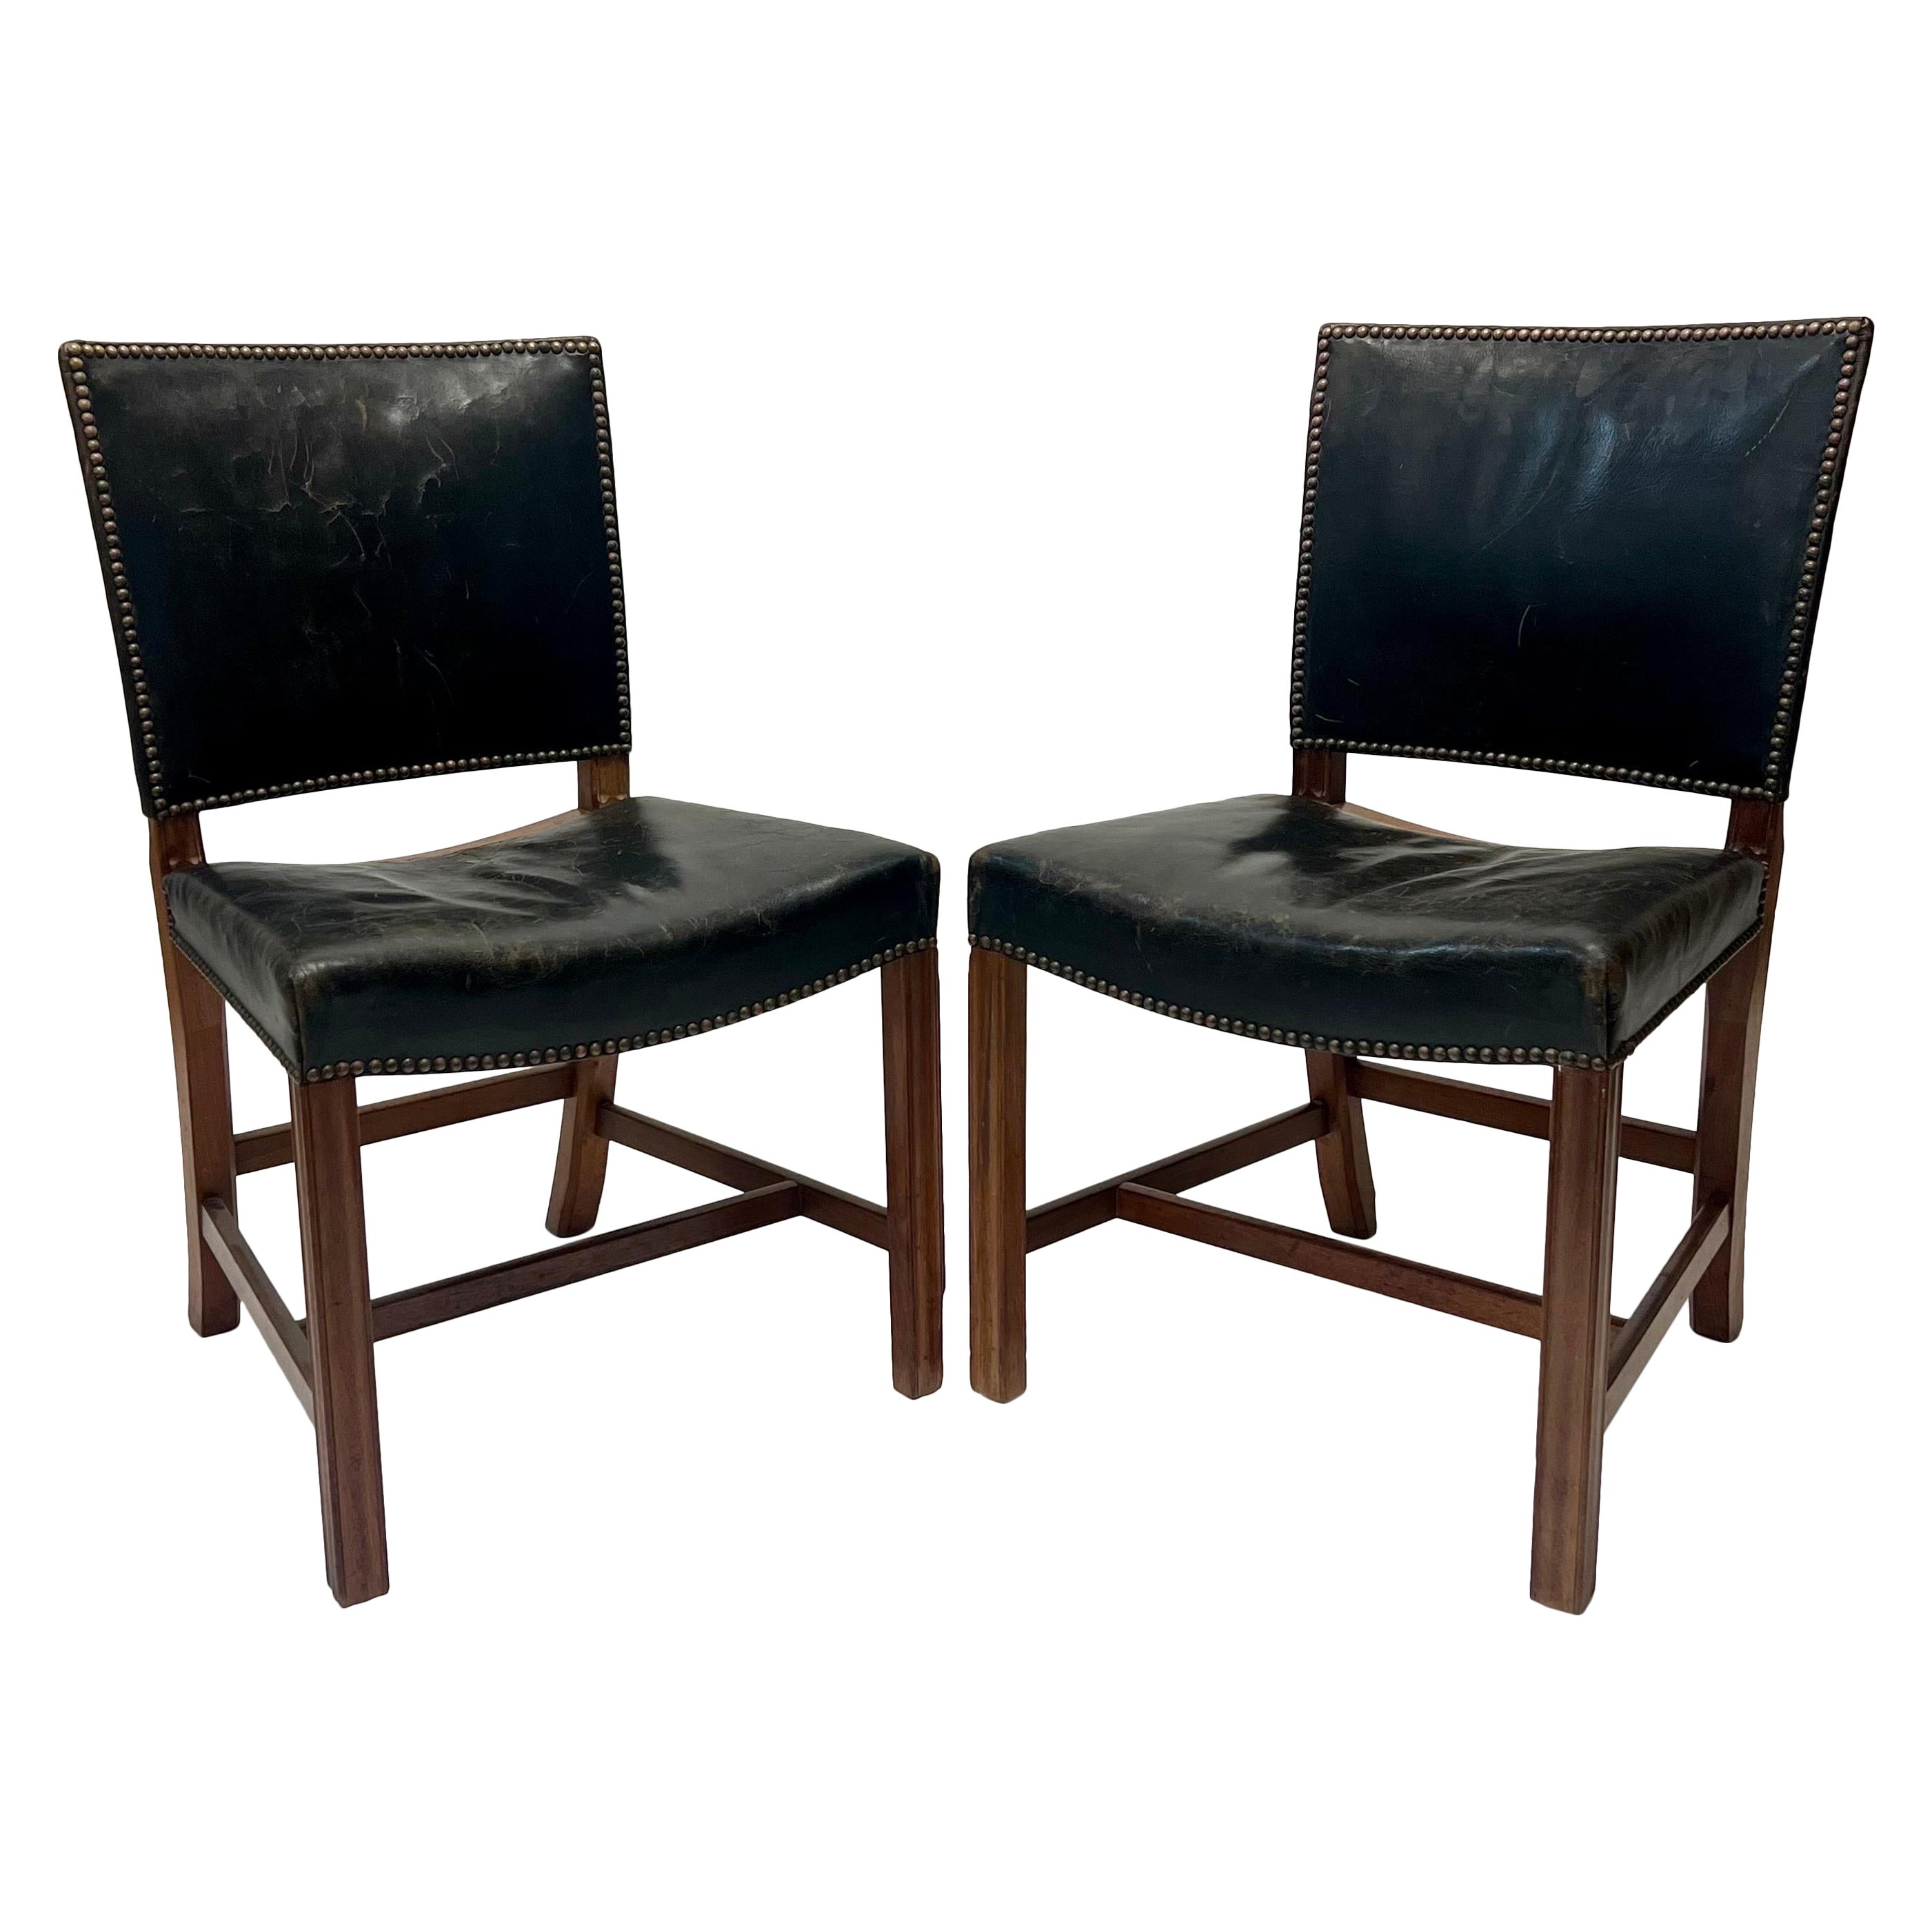 Early Kaare Klint Red Chairs in Cuban Mahogany, circa 1930s For Sale